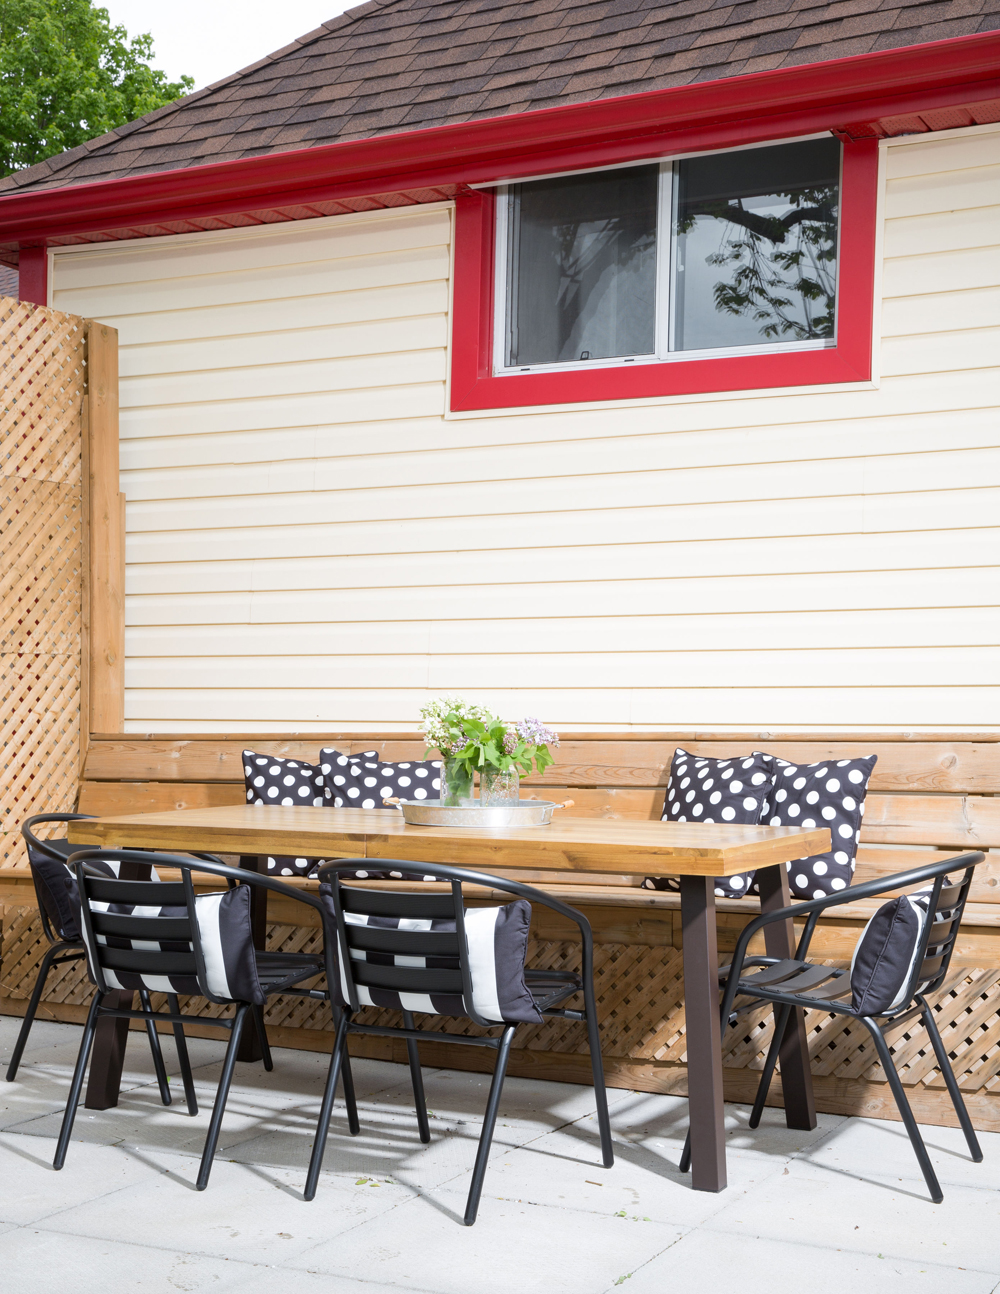 outdoor table, wooden bench, black chairs, black and white dot cushions, red trim on house exterior